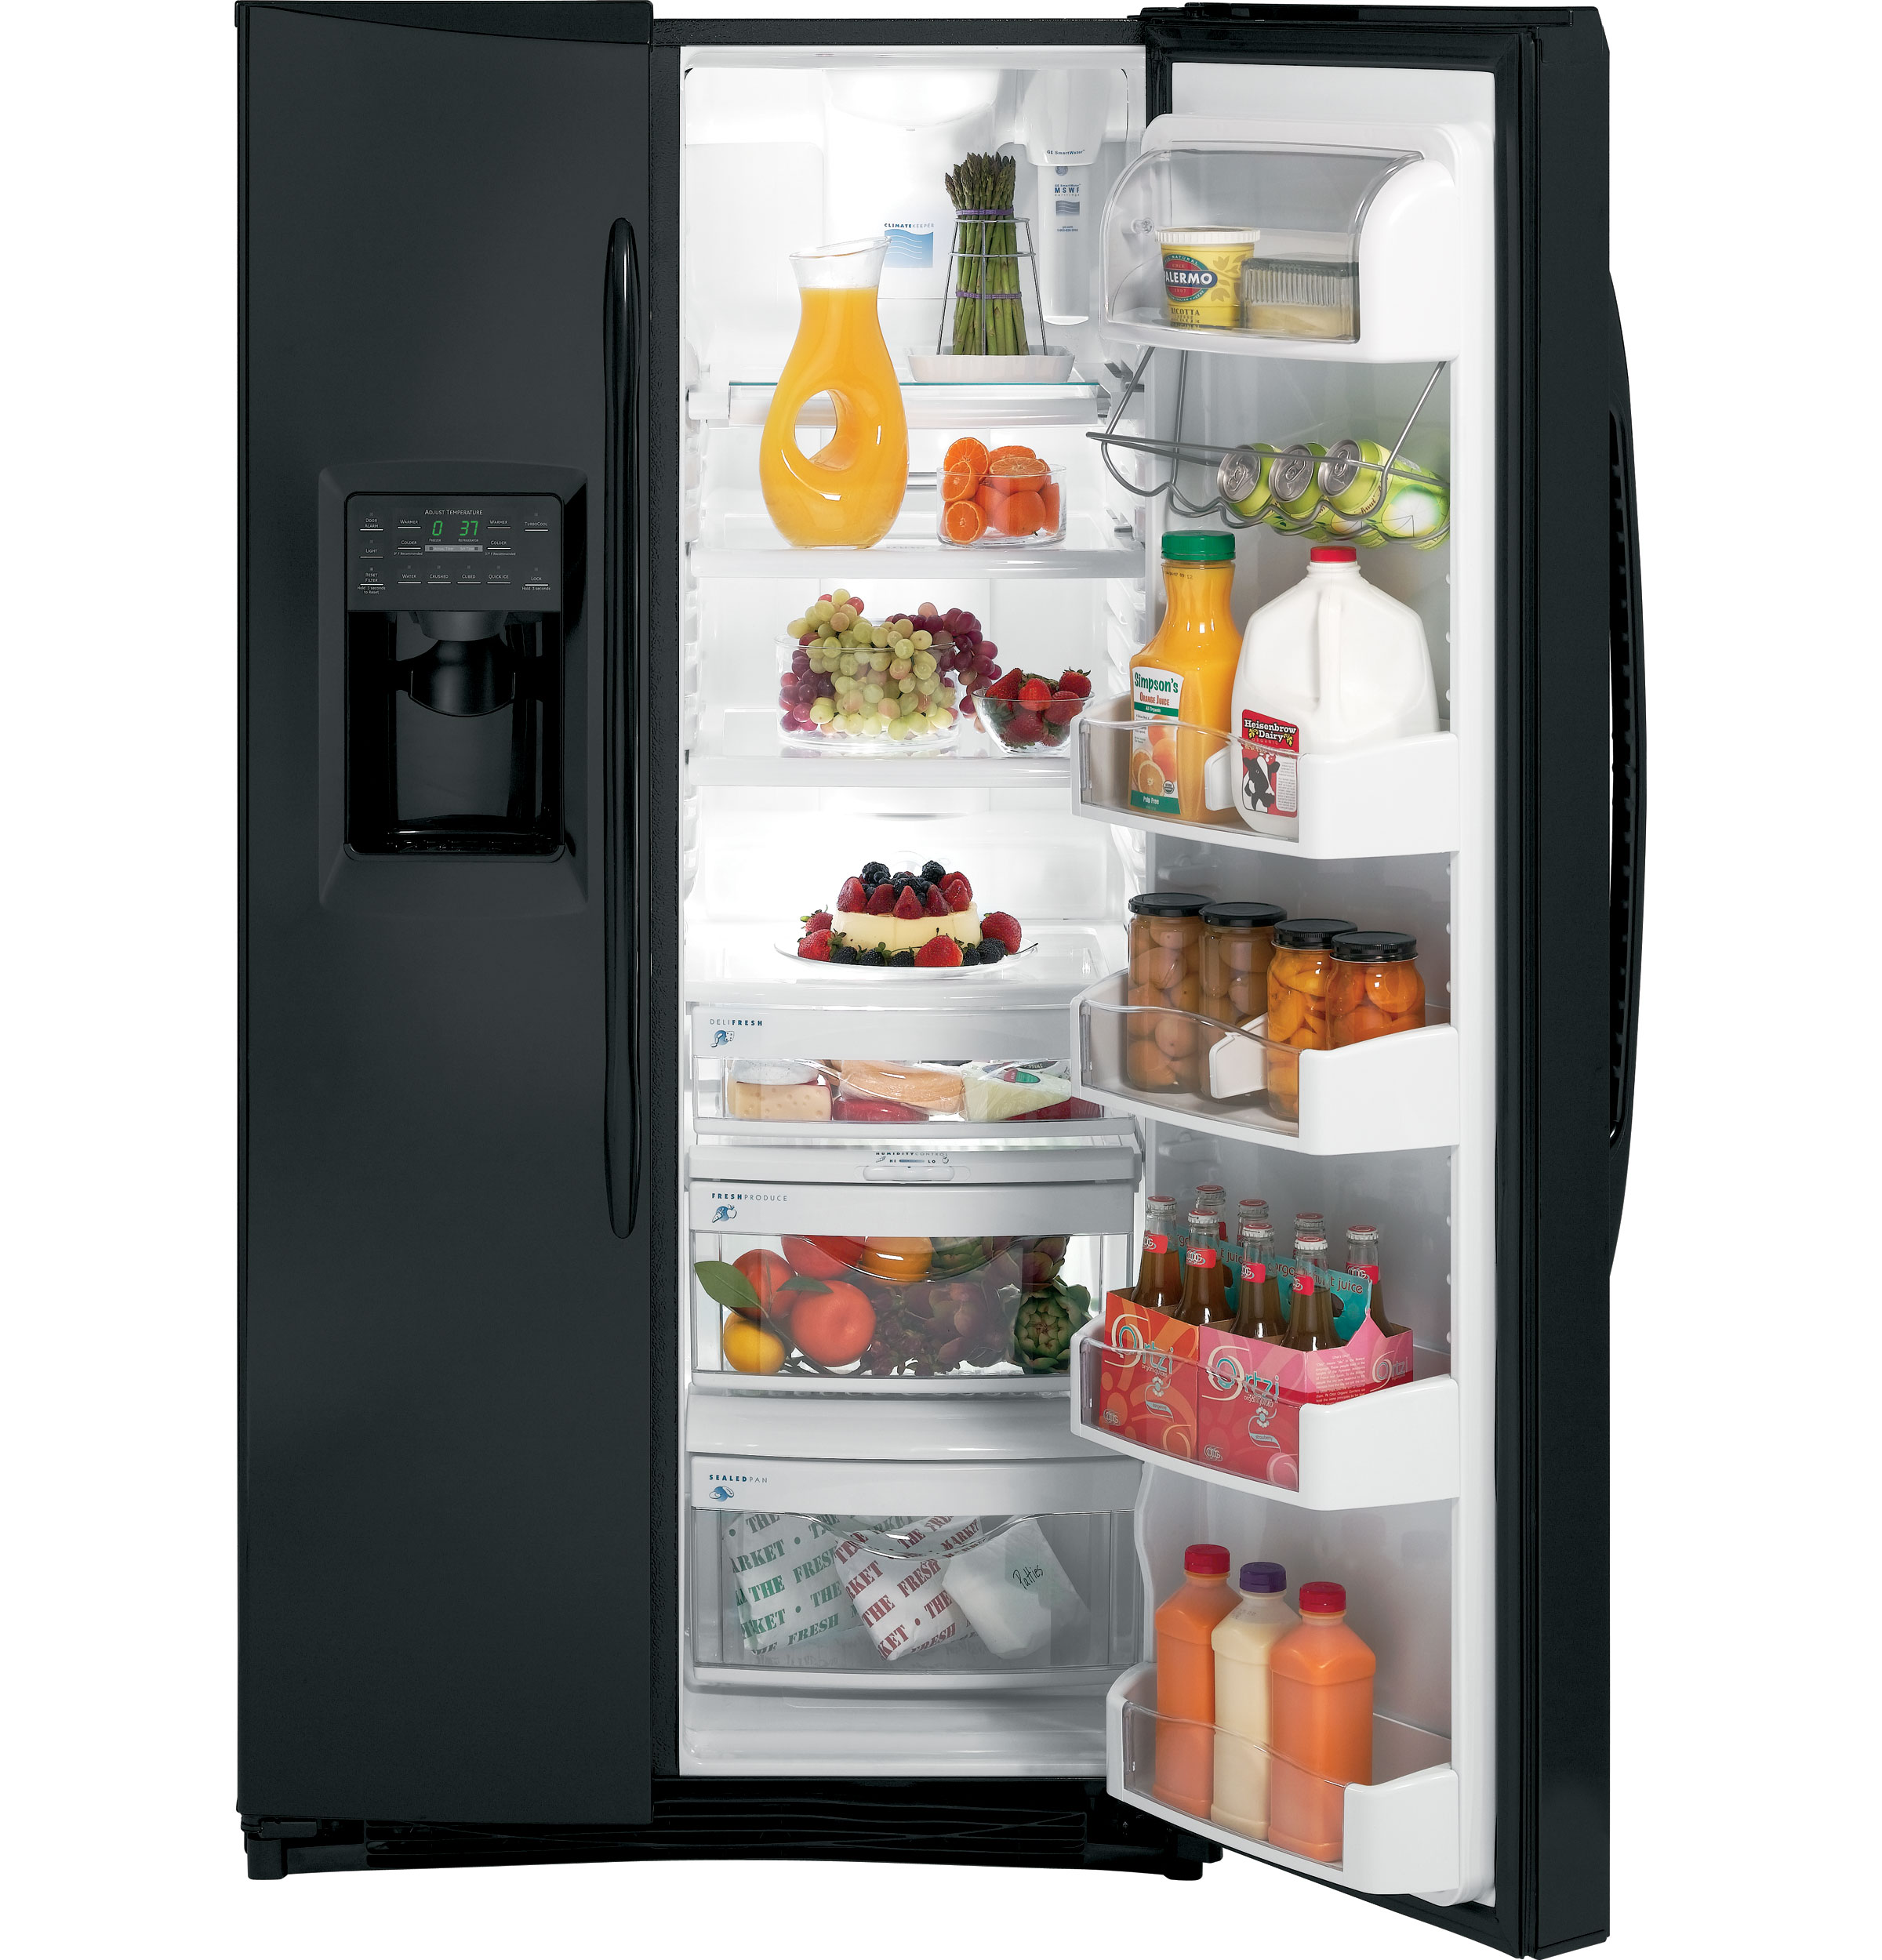 GE Profile™ ENERGY STAR® 25.6 Cu. Ft. Side-by-Side Refrigerator with Dispenser